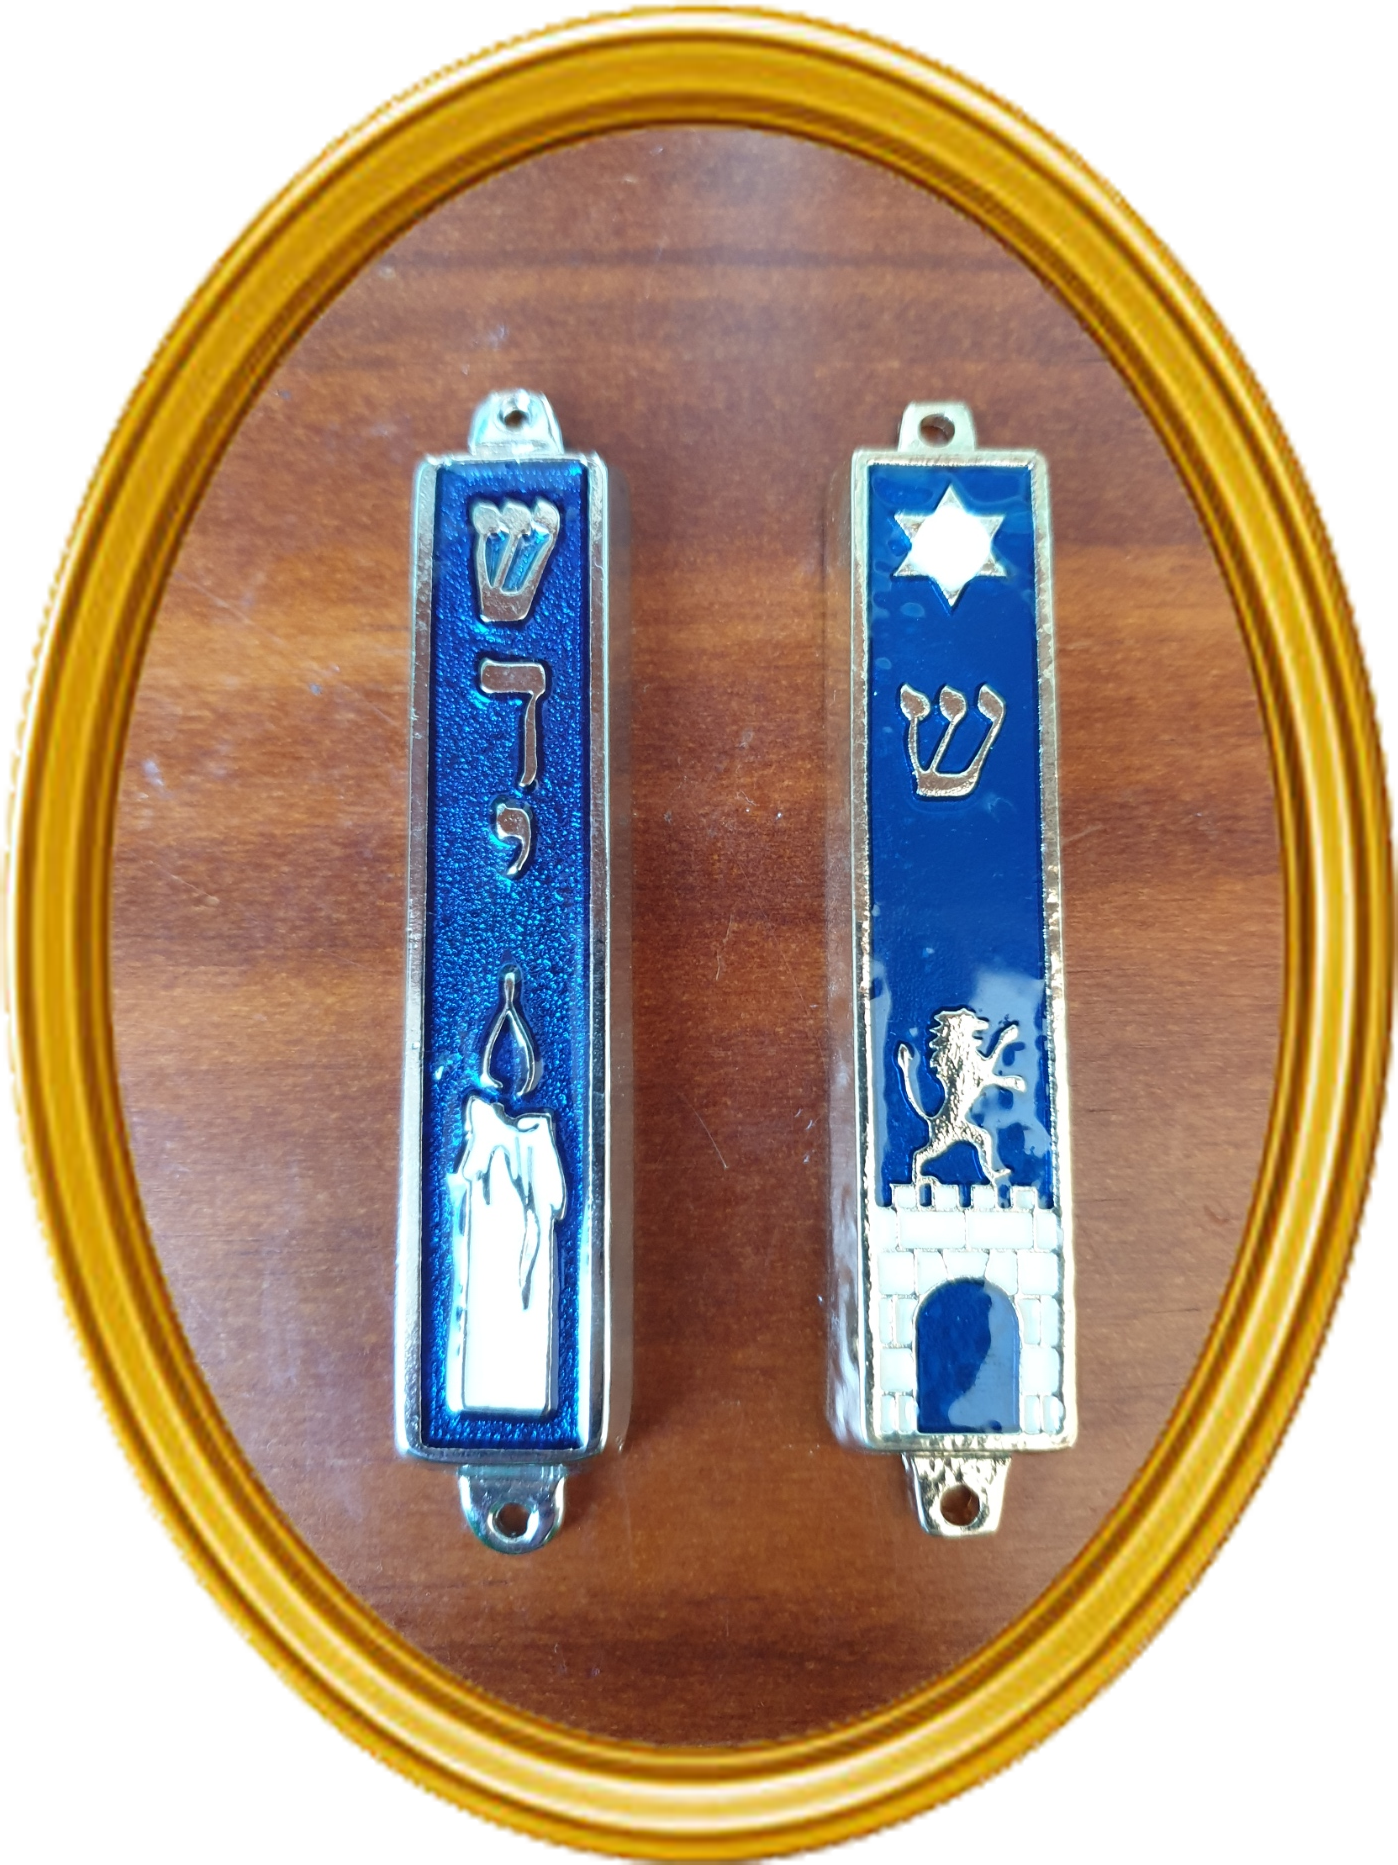 Two mezuzot on a wooden background in an oval cutout shape surrounded by a gold frame. The mezuzah on the left is silver and blue with the Hebrew word 'shaddai' and a picture of a white candle. The mezuzah on the right is gold and blue, with the Hebrew letter 'shin' and a picture of a gold lion on a white brick wall.